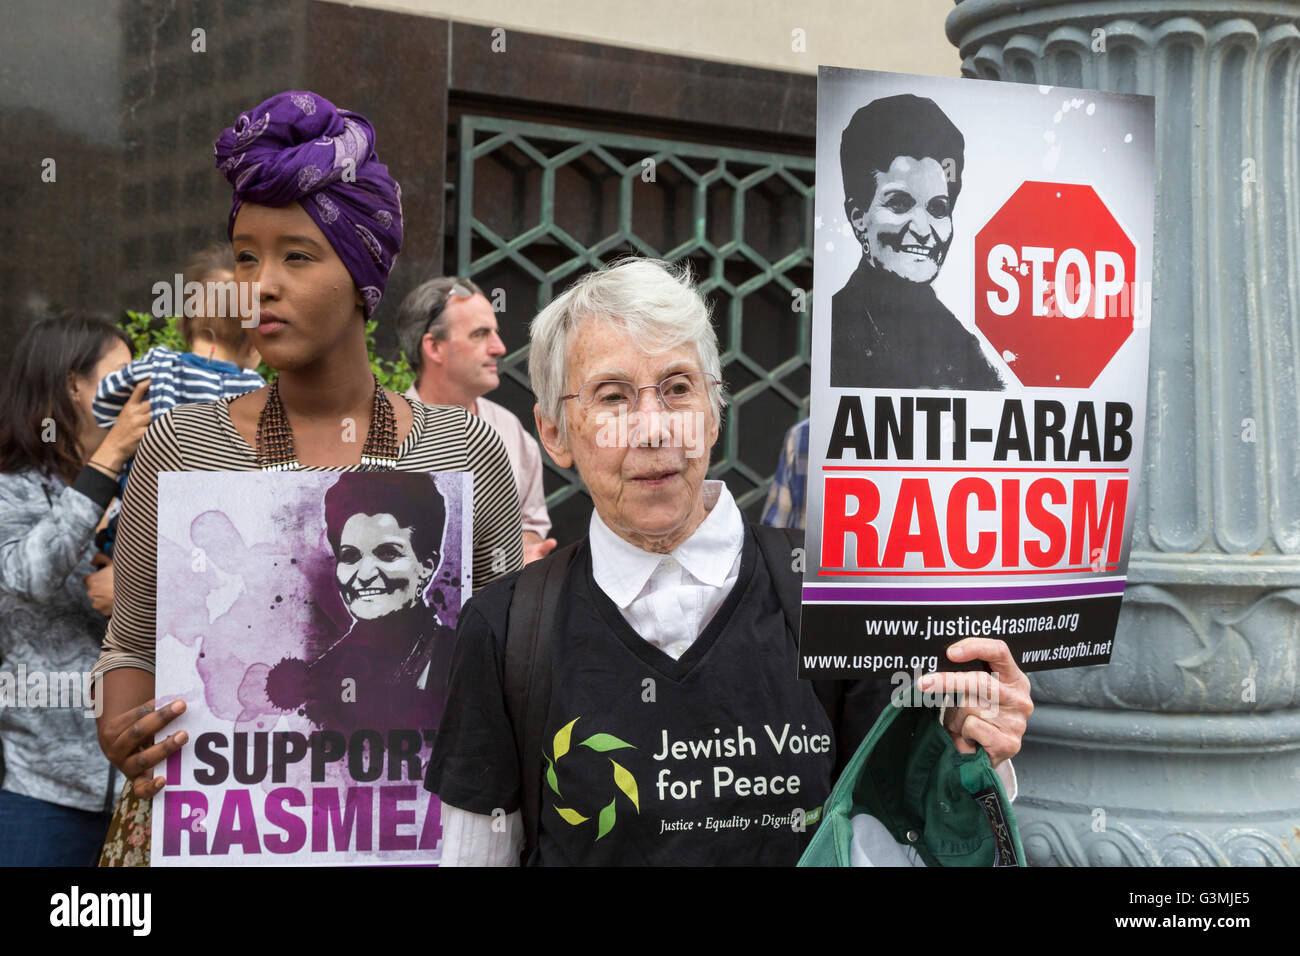 Detroit, Michigan, USA. 13th June, 2016. Supporters of Palestinian-American activist Rasmea Odeh rallied outside a Federal Courthouse where a federal judge held a status conference on her request for a new trial. In 2015, Odeh was convicted of lying on her 2004 application for U.S. citizenship. But a federal appeals court ordered Judge Gershwin Drain to reconsider the case because he had improperly excluded testimony about Odeh's torture in an Israeli prison. Credit:  Jim West/Alamy Live News Stock Photo